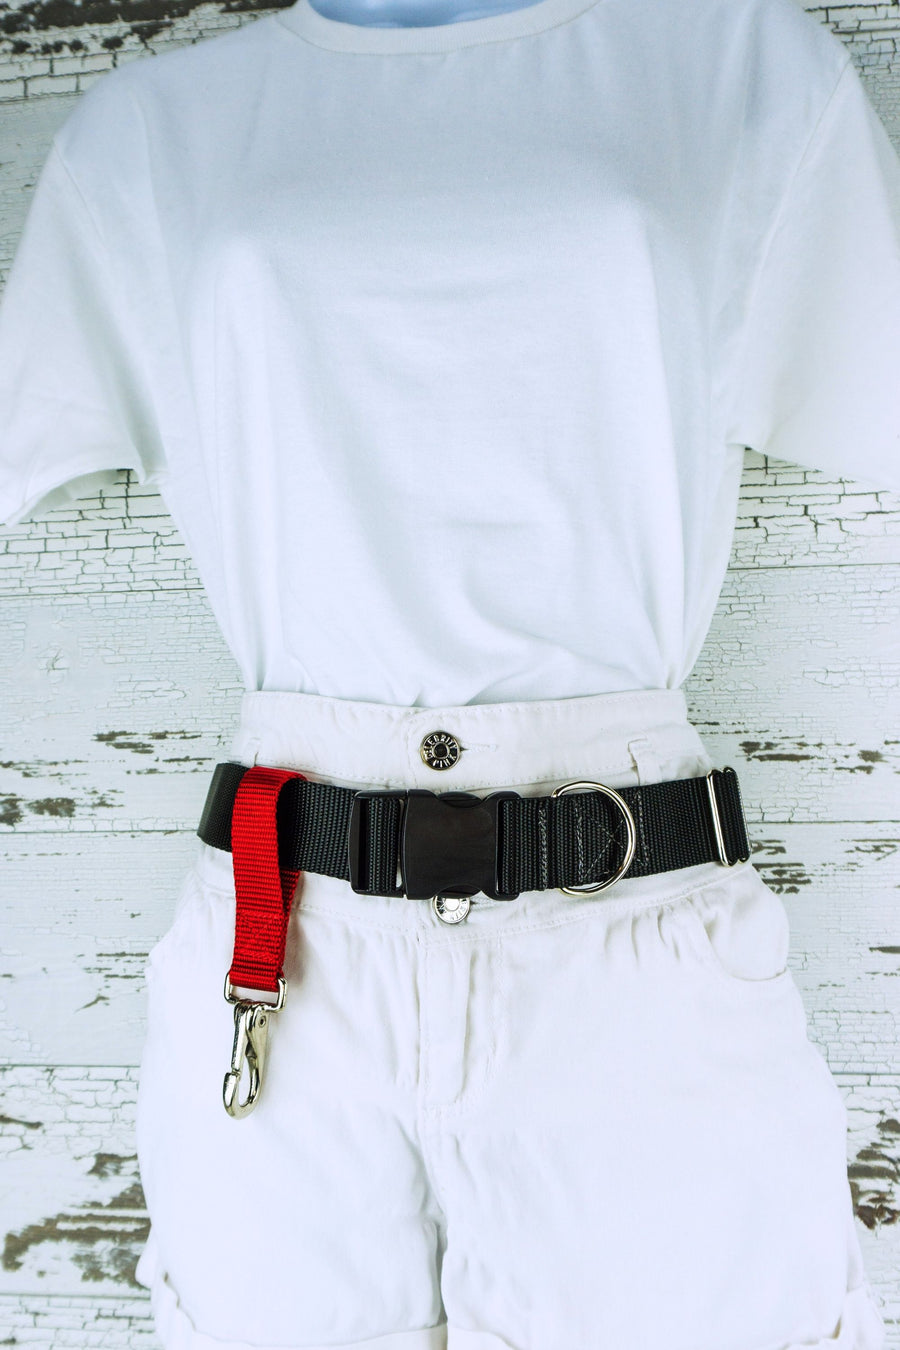 A belt add on dropped clip is shown connected to a mannequin with a hands free leash belt.